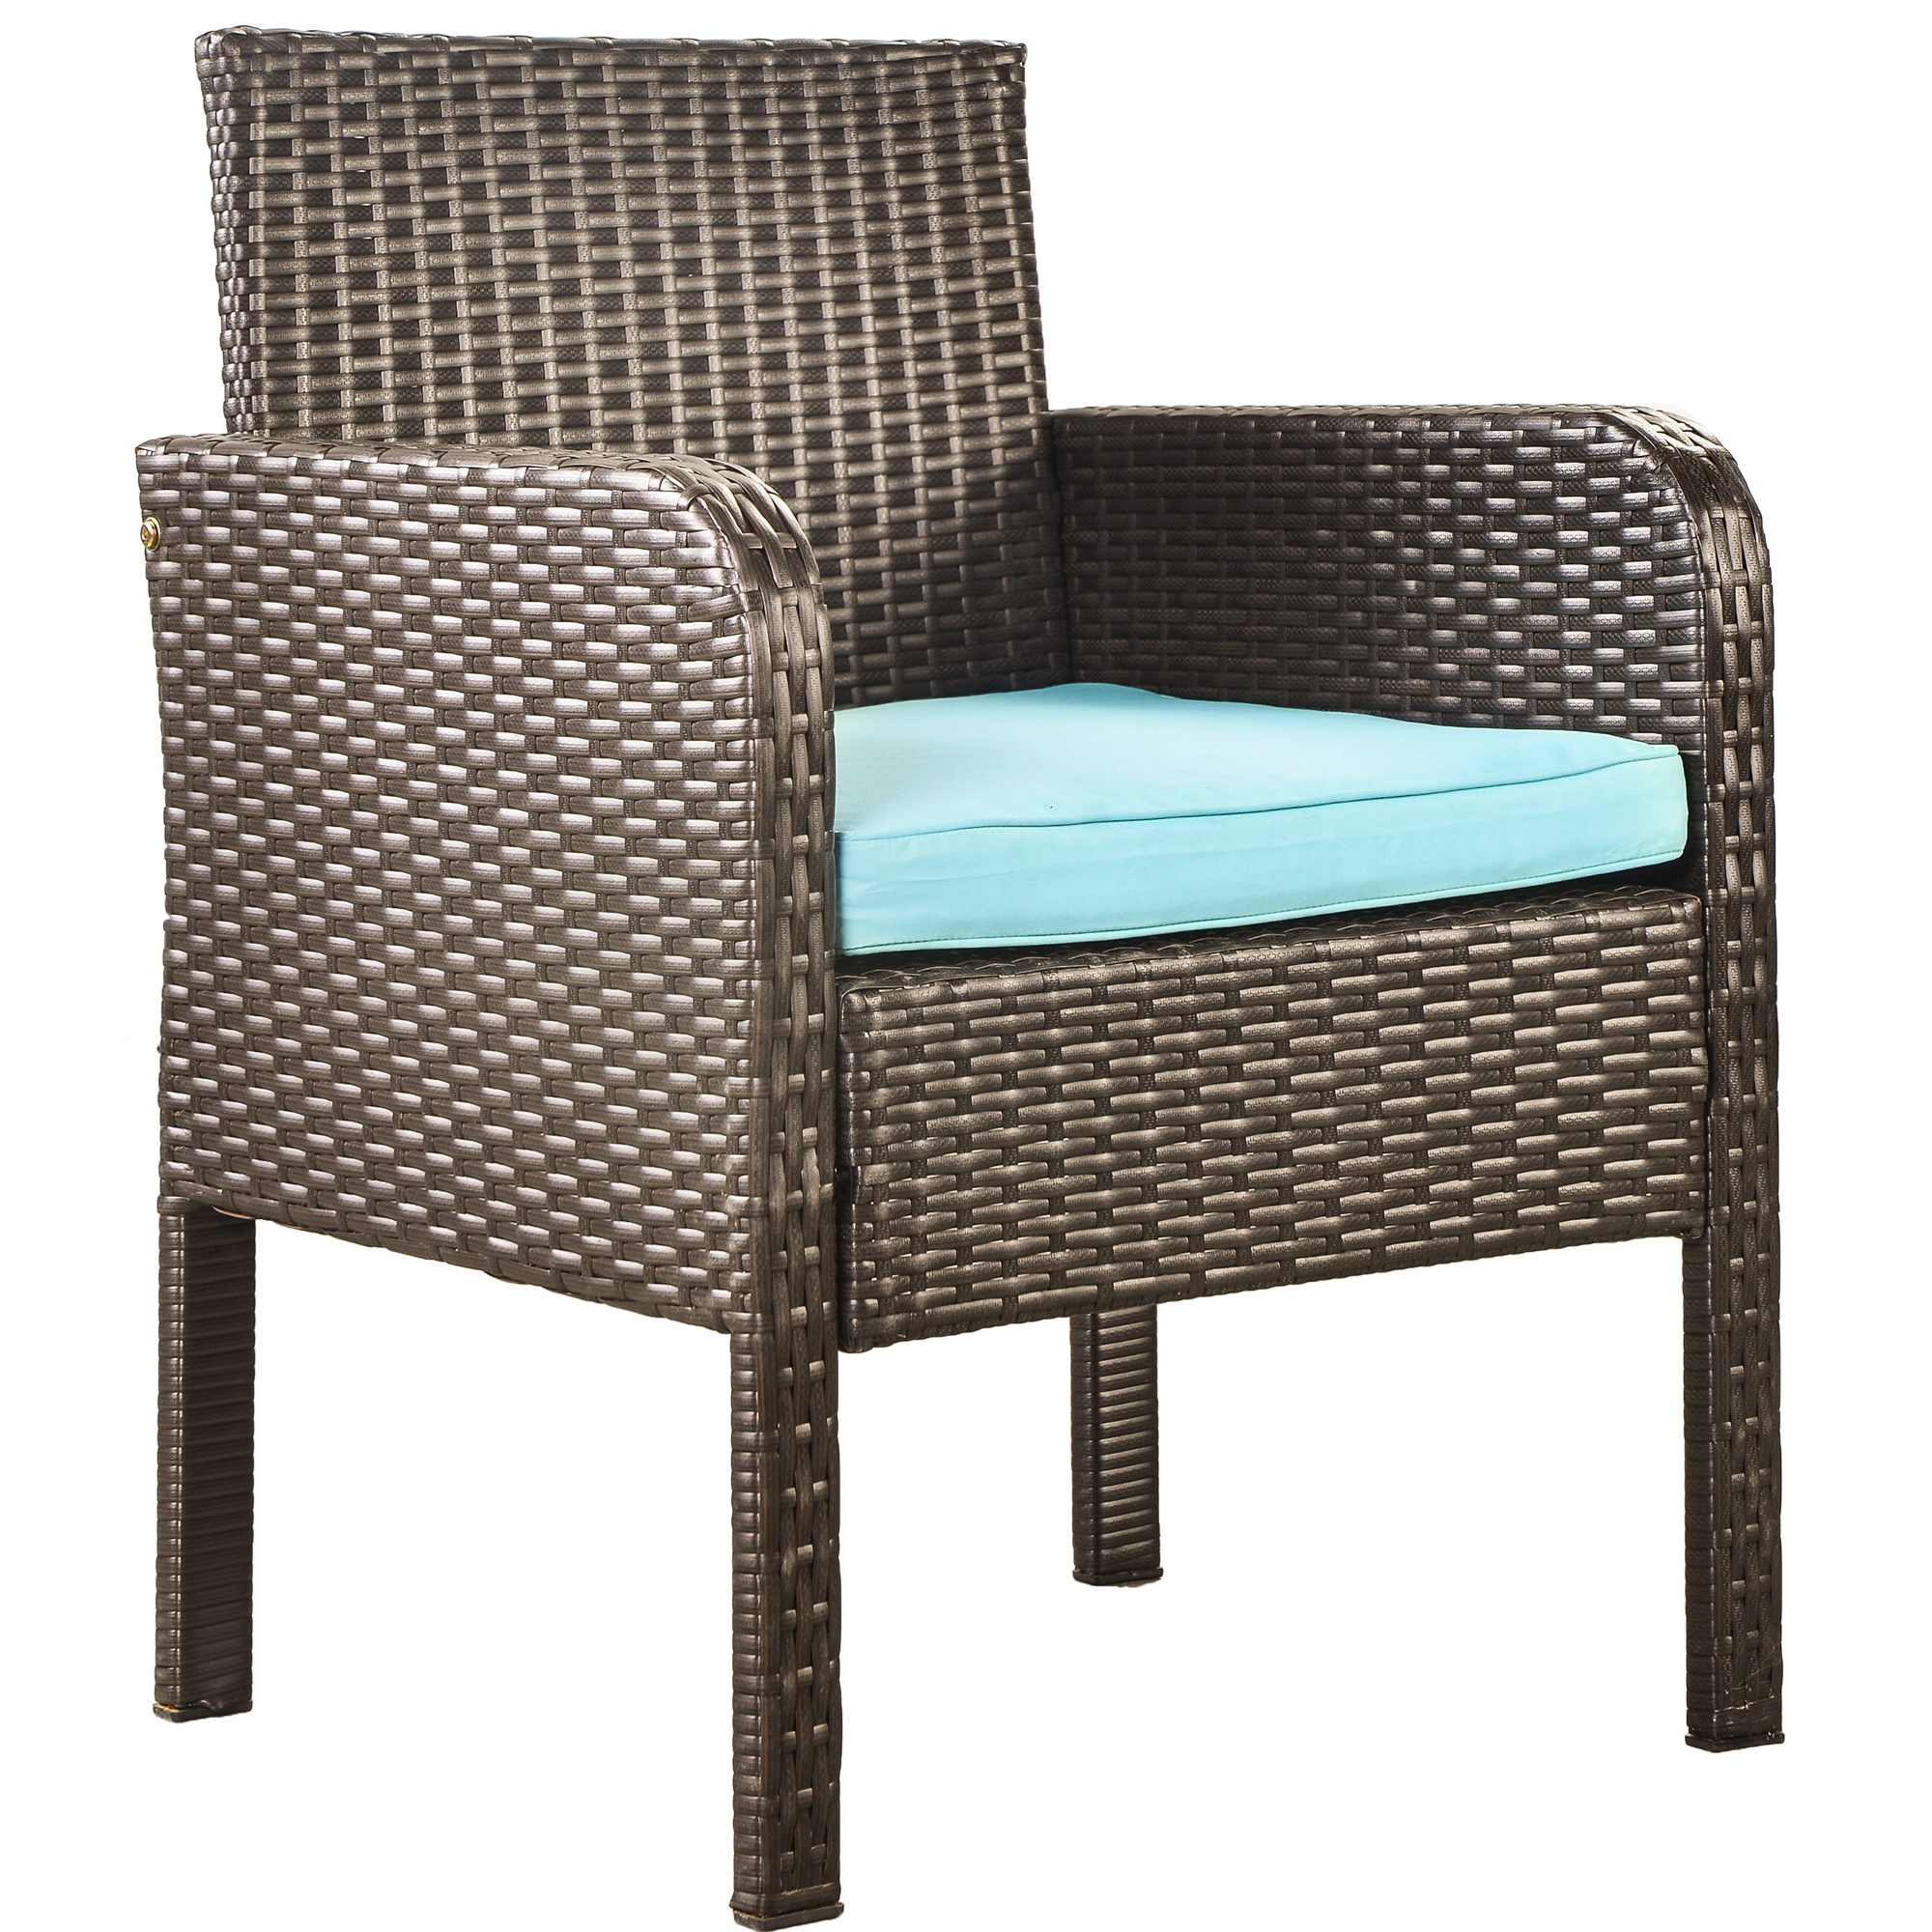 Patio Furniture Set, 4-Piece Outdoor Indoor Use Bistro Wicker Chairs Conversation Sets, Leisure Rattan Chair Sets with 1 Loveseat, 2 Single Chairs and Glass Coffee Table, Outdoor Armchair Seat, S1784 - image 3 of 7